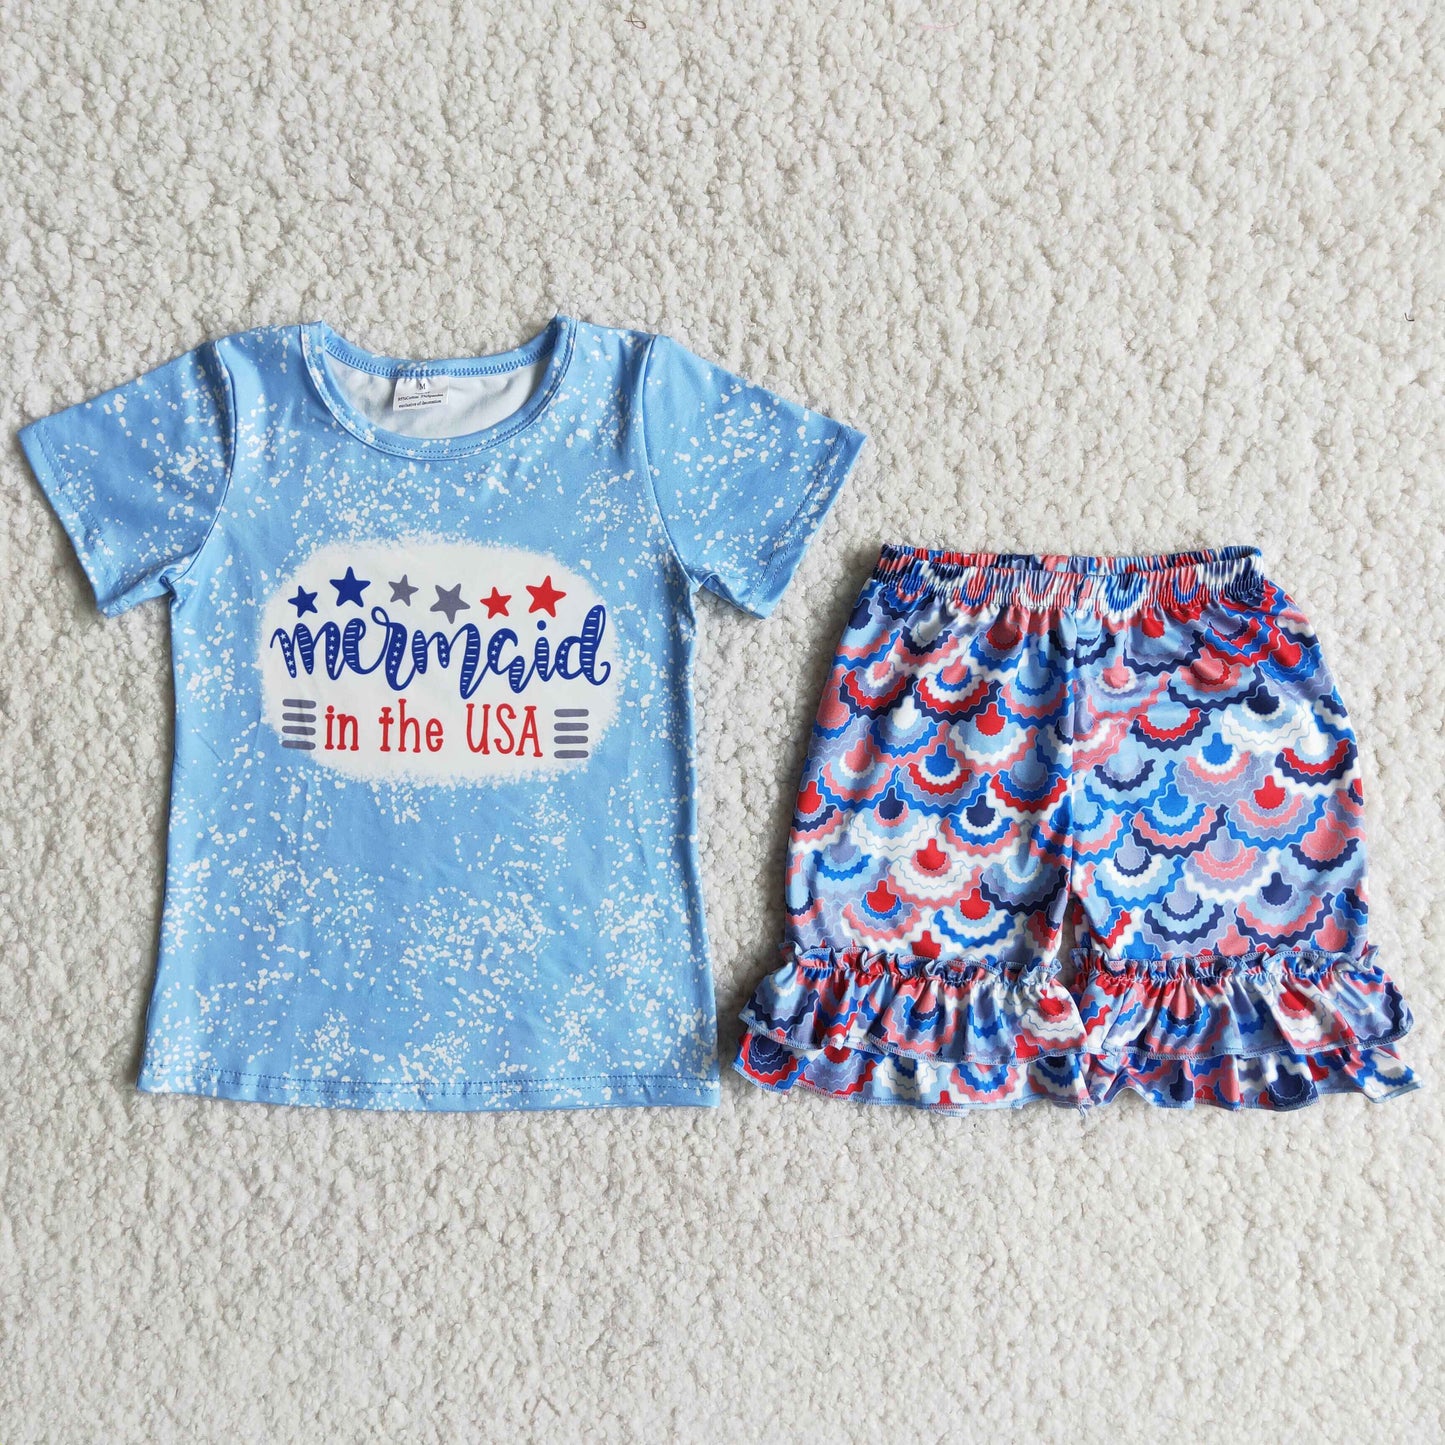 D13-19 Kids boys clothes short sleeve with shorts set-promotion 2024.5.03 $5.5